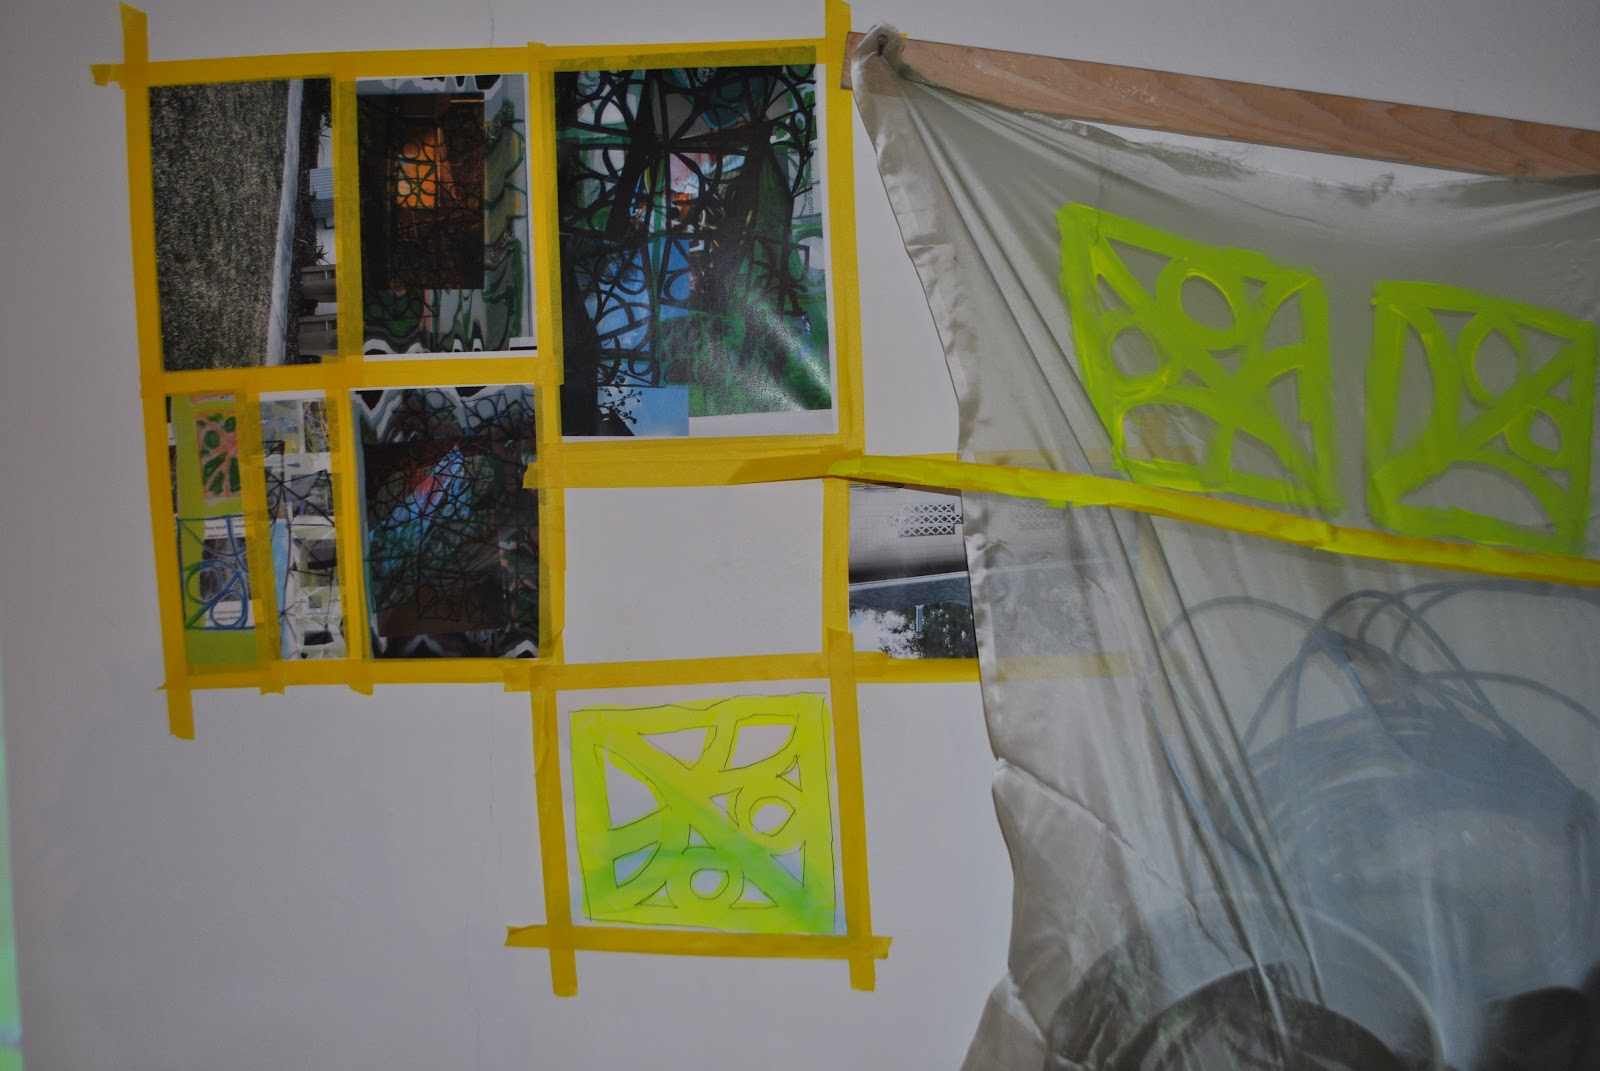 Image: Kelly Clare, enter / the net / here, 2022, Edna Carlsten Gallery. Six images and one drawing are taped onto the wall with yellow tape. A sheer piece of fabric with painted fluorescent yellow breeze blocks hangs next to the images. Image courtesy of the artist.